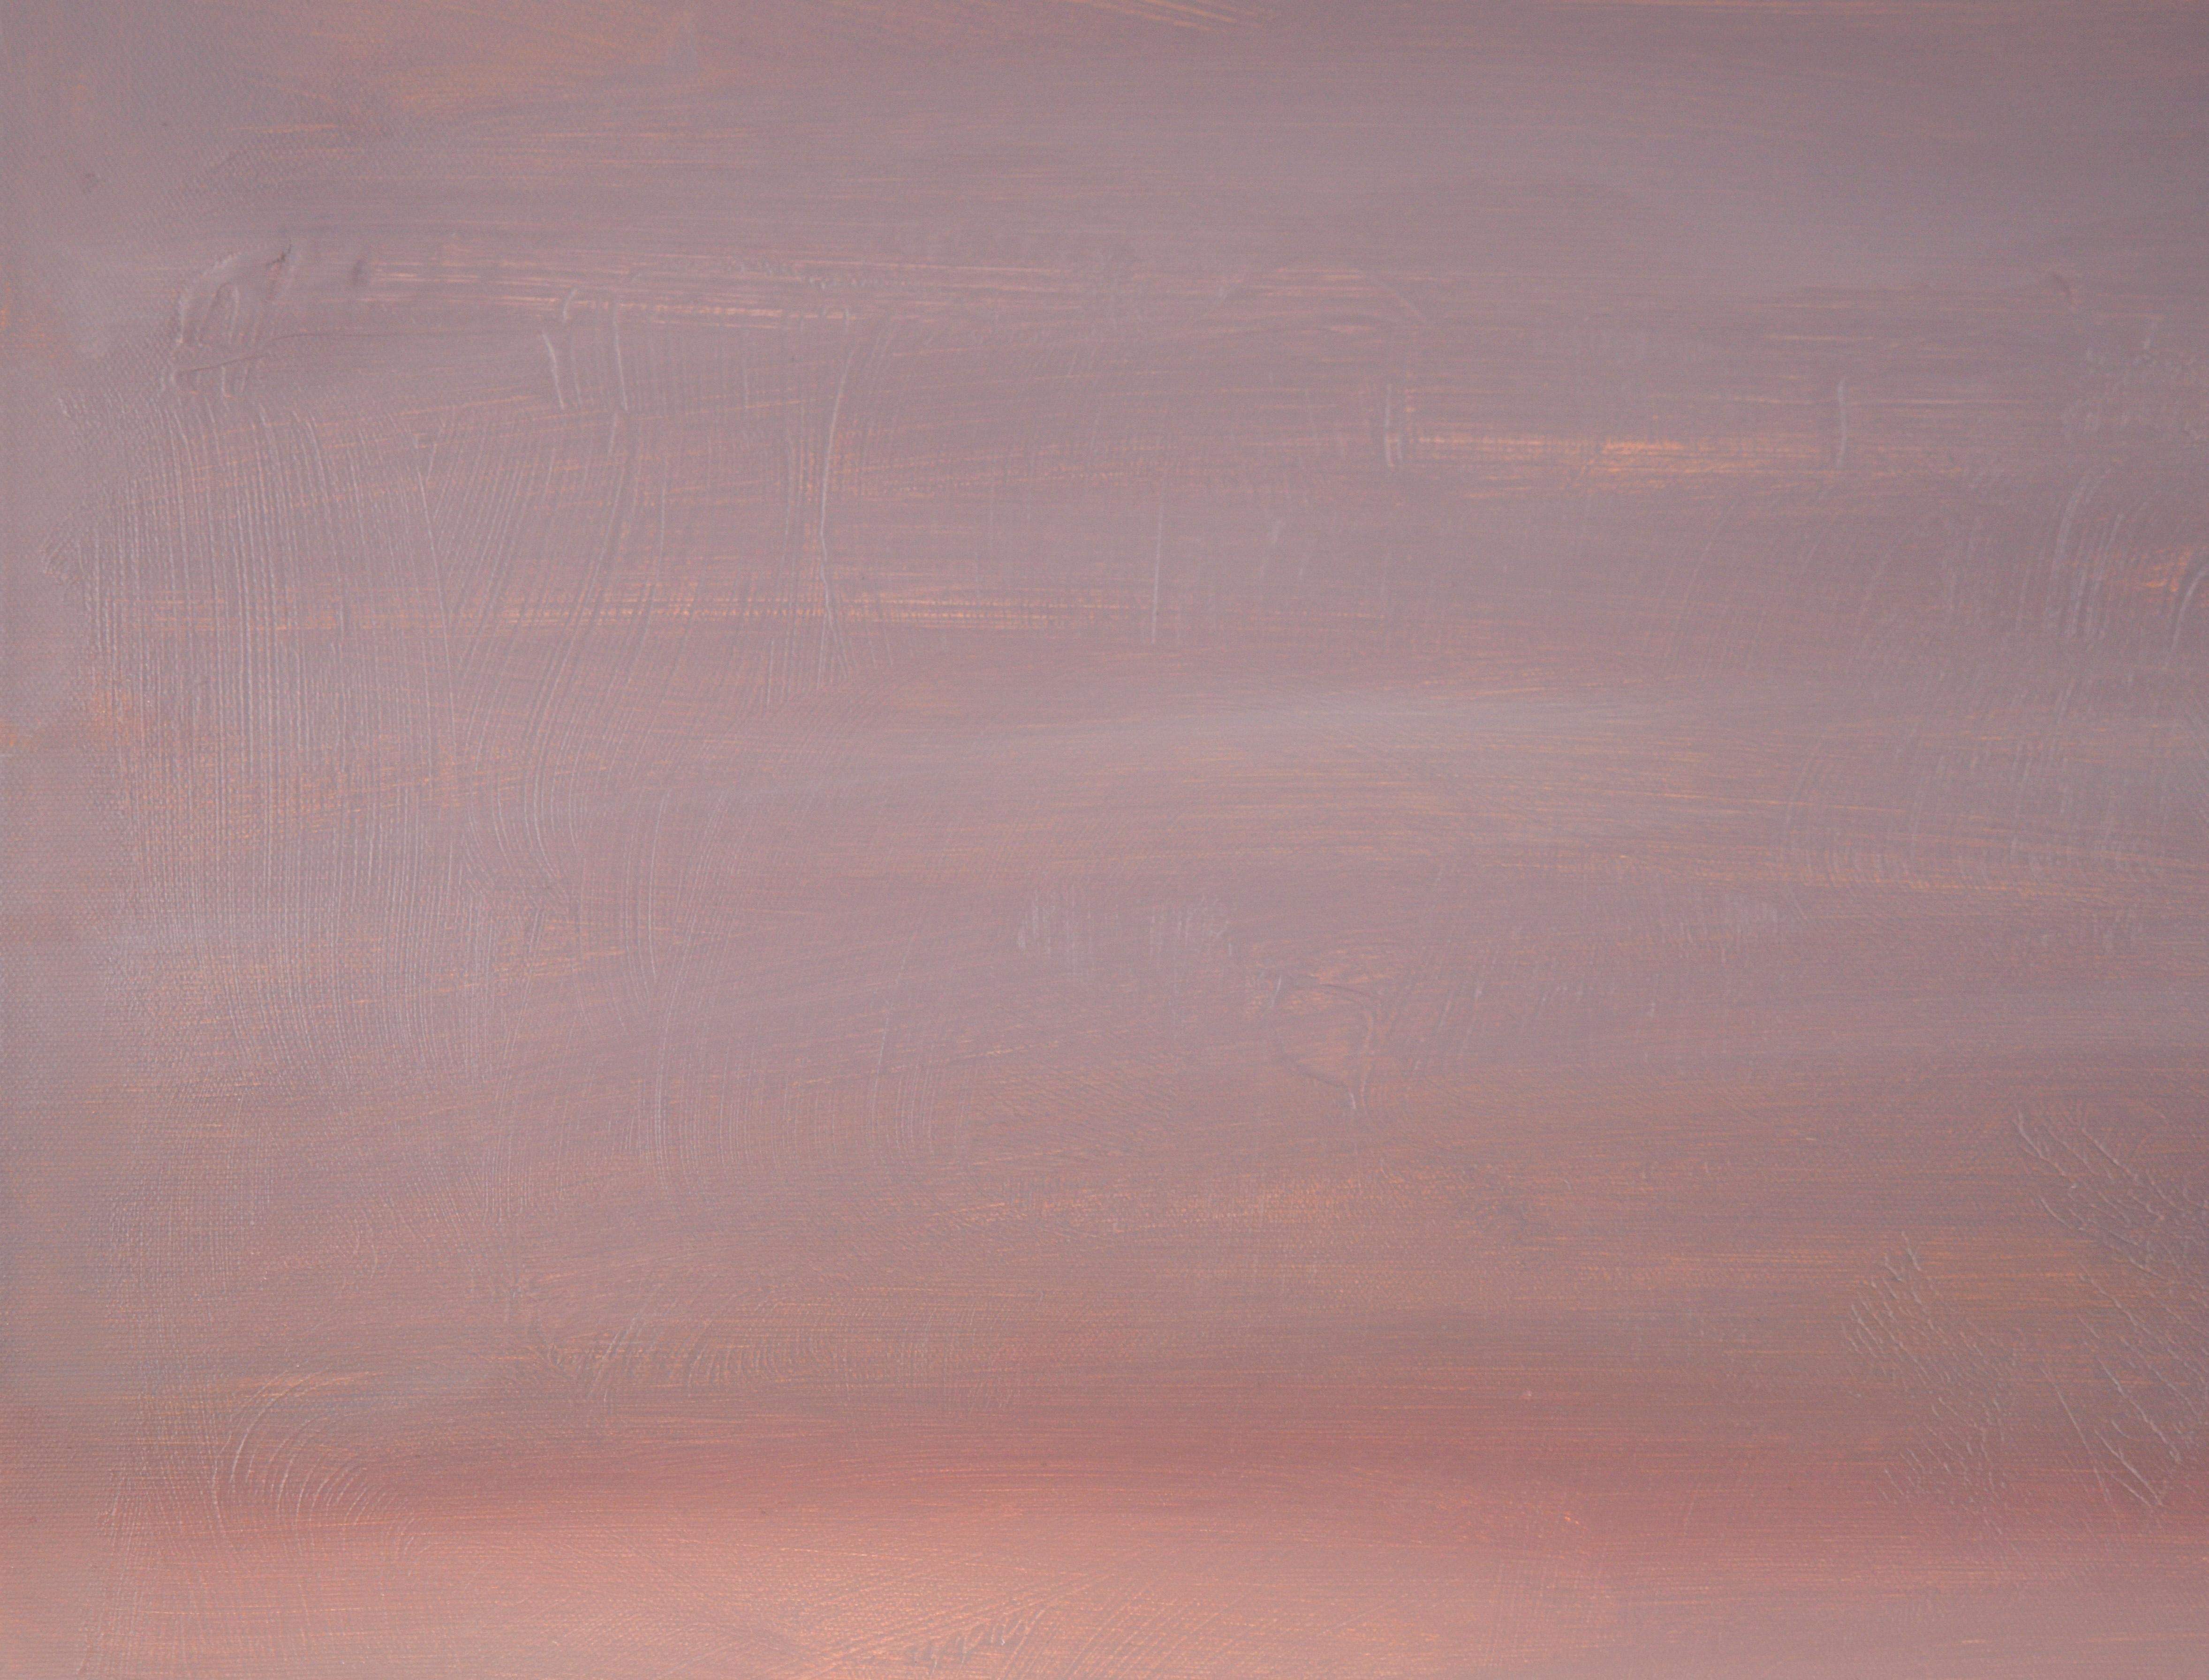 Hazy Purple and Pink Minimalist Landscape in Acrylic on Canvas - Painting by Unknown